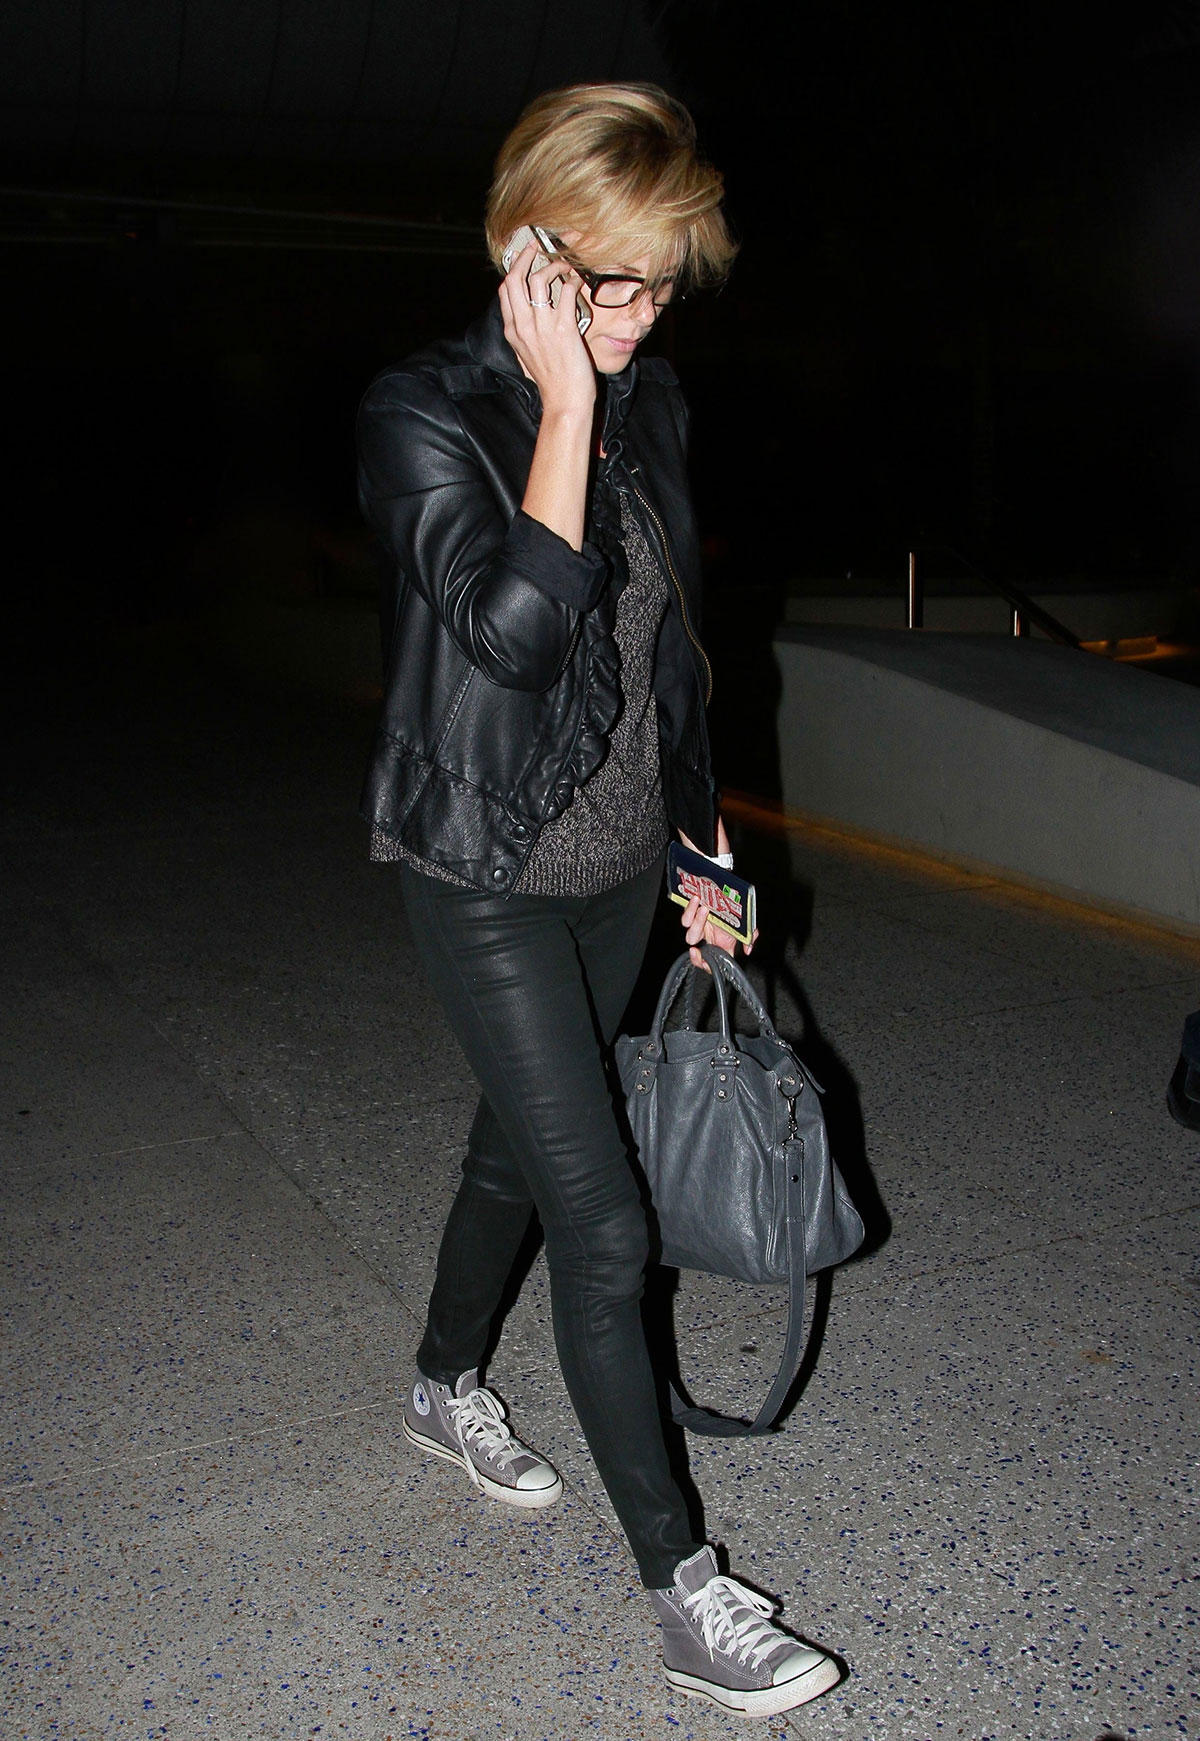 Charlize Theron at LAX airport in LA